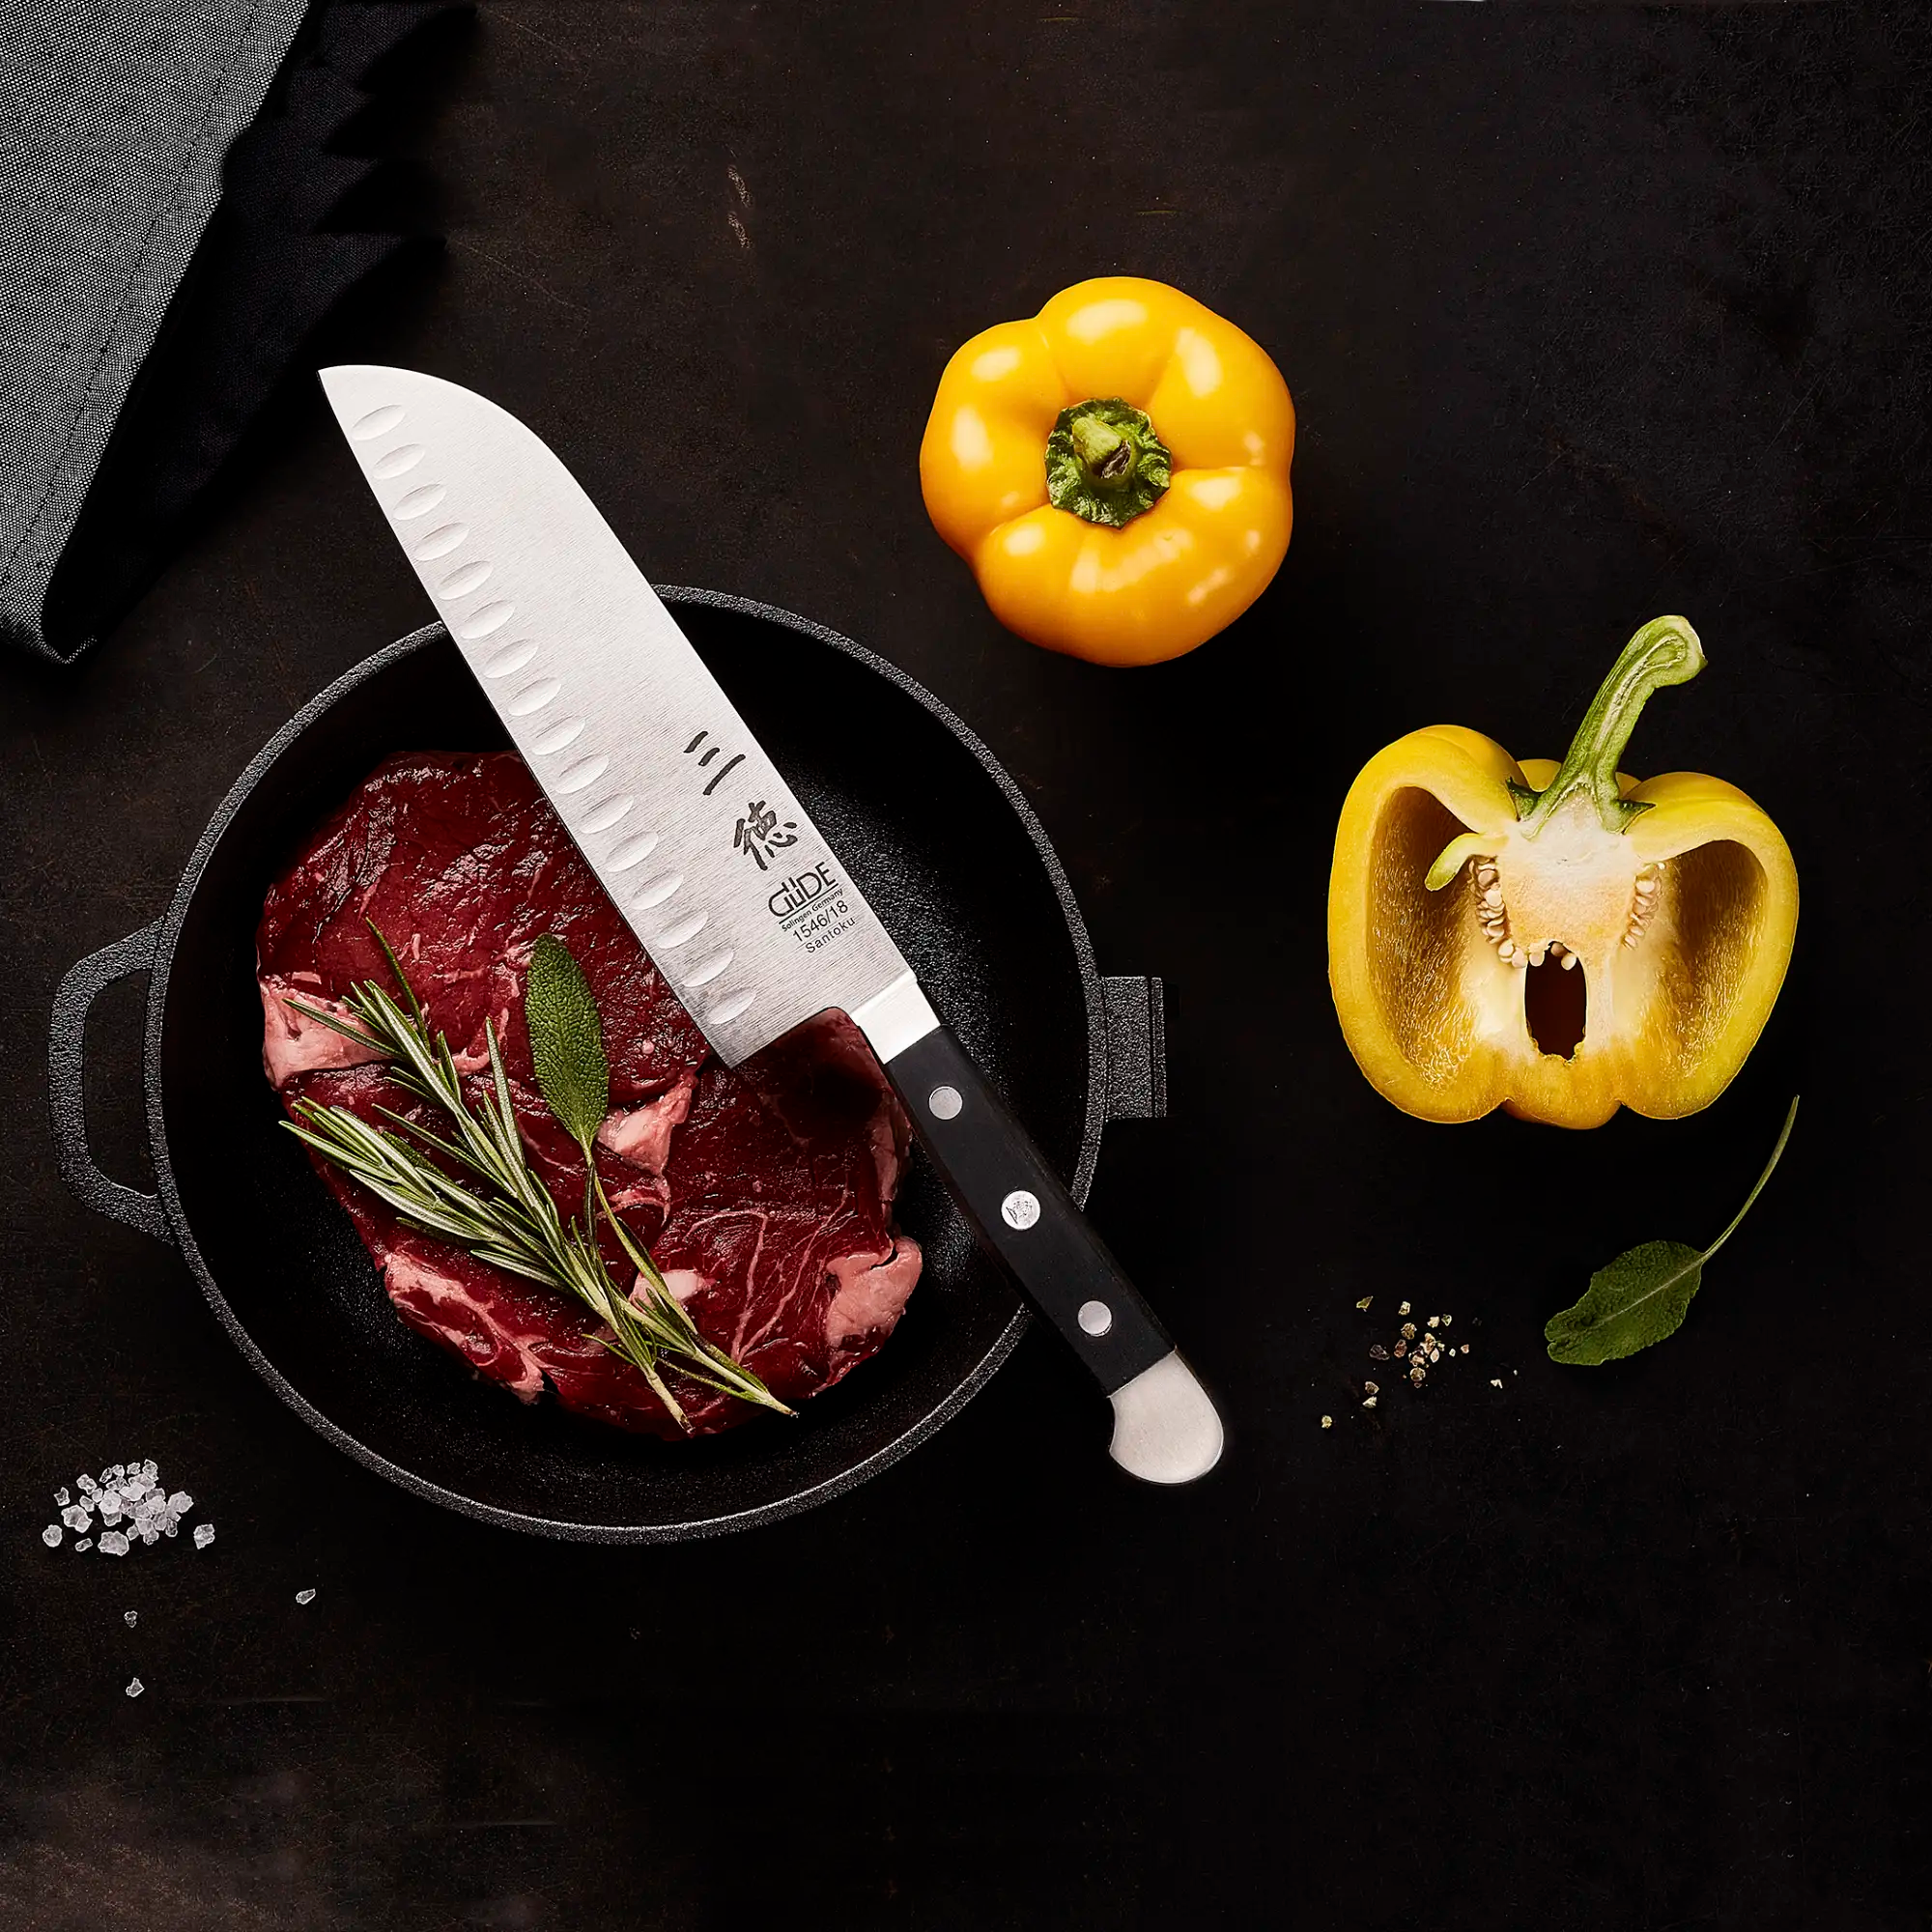 Discover the Best Santoku Knives - Top 10 Japanese Chef Favorites.